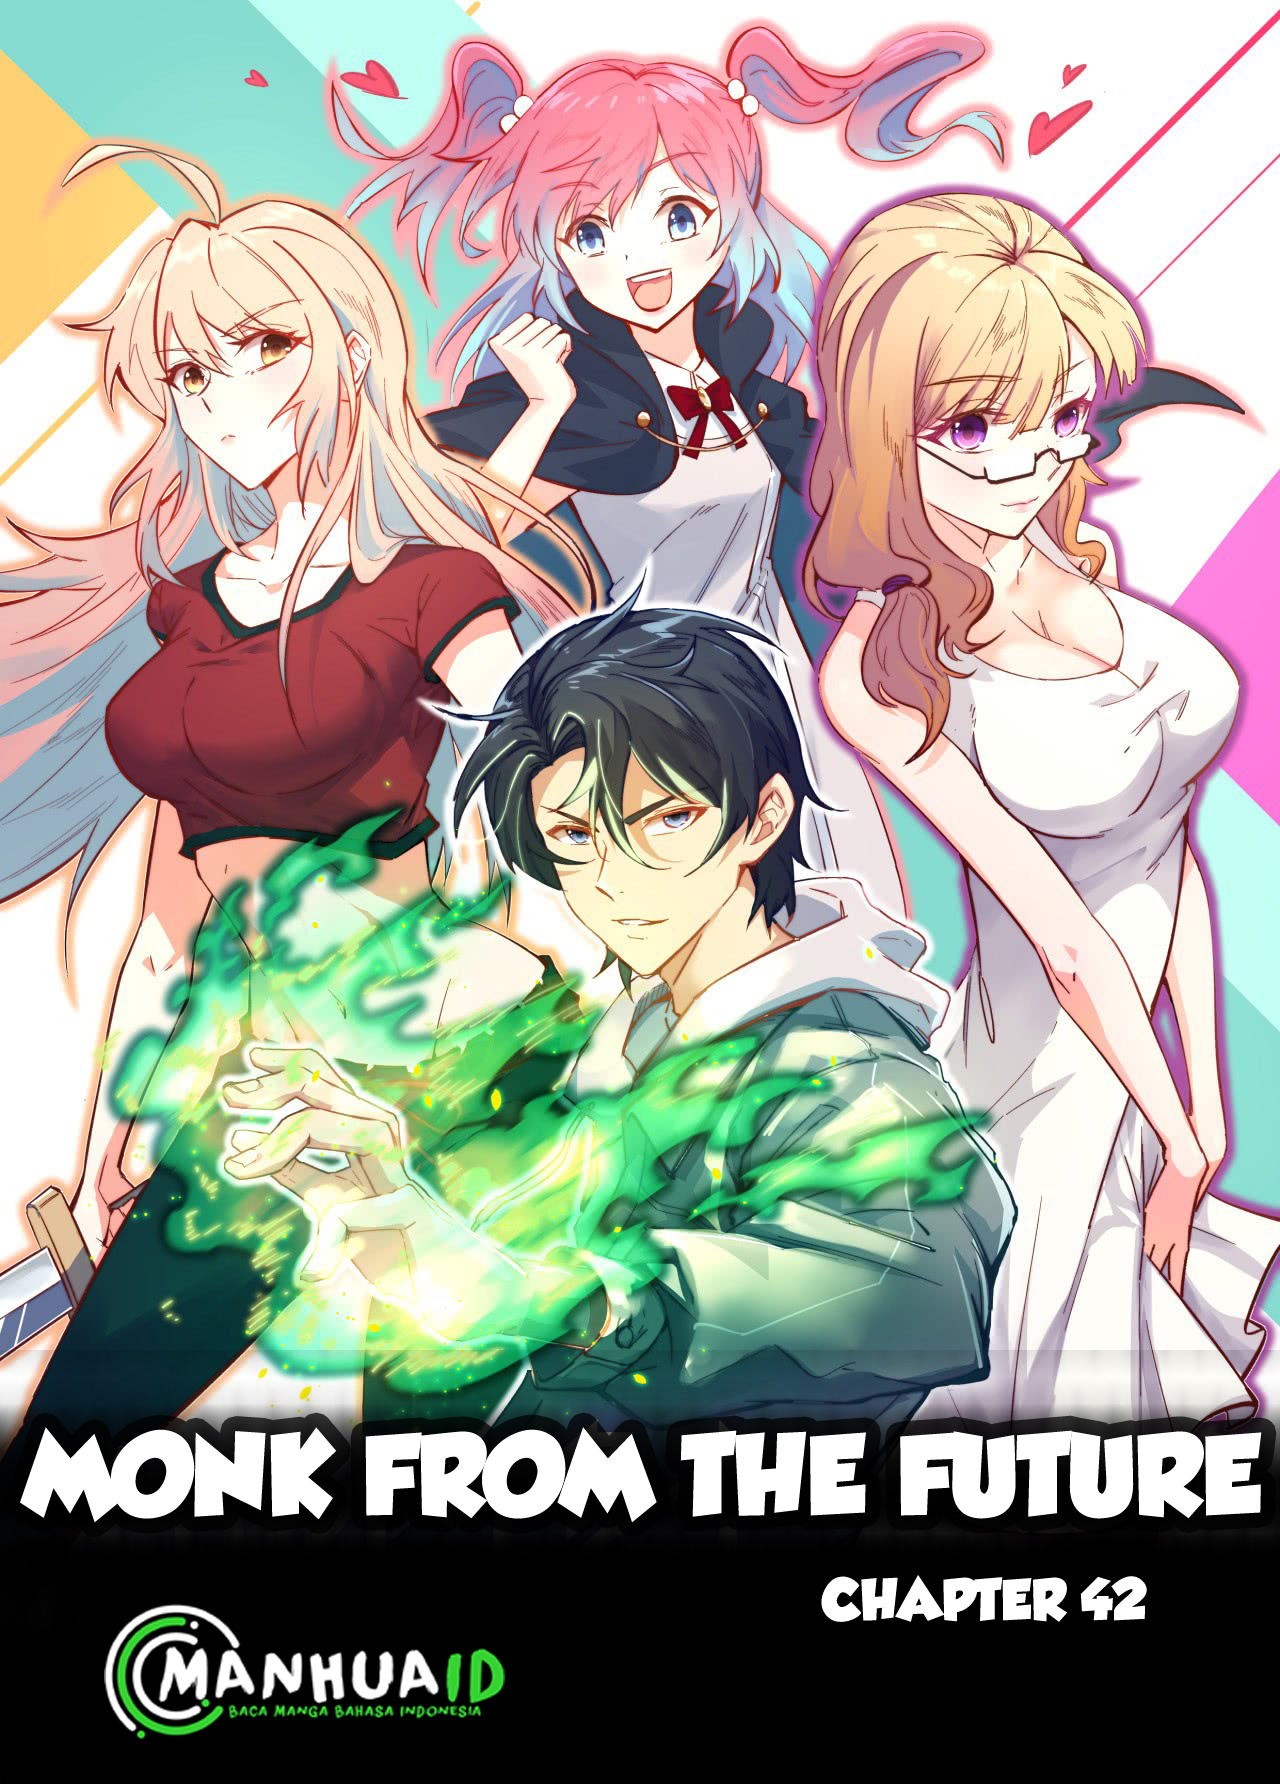 Monk From the Future Chapter 42